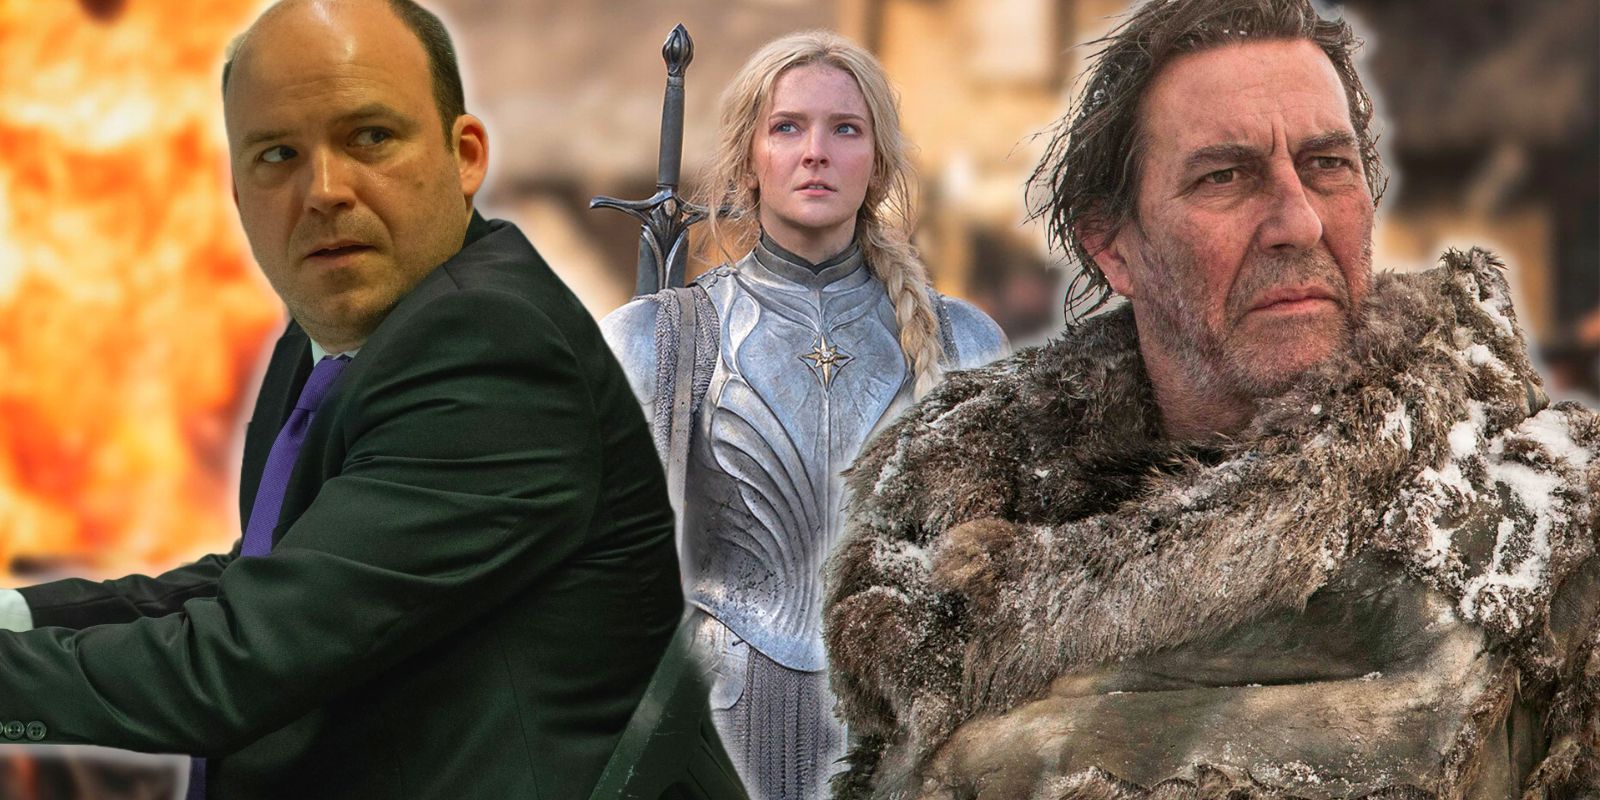 Rory Kinnear, Ciaran Hinds next to Galadriel in LOTR: The Rings of Power